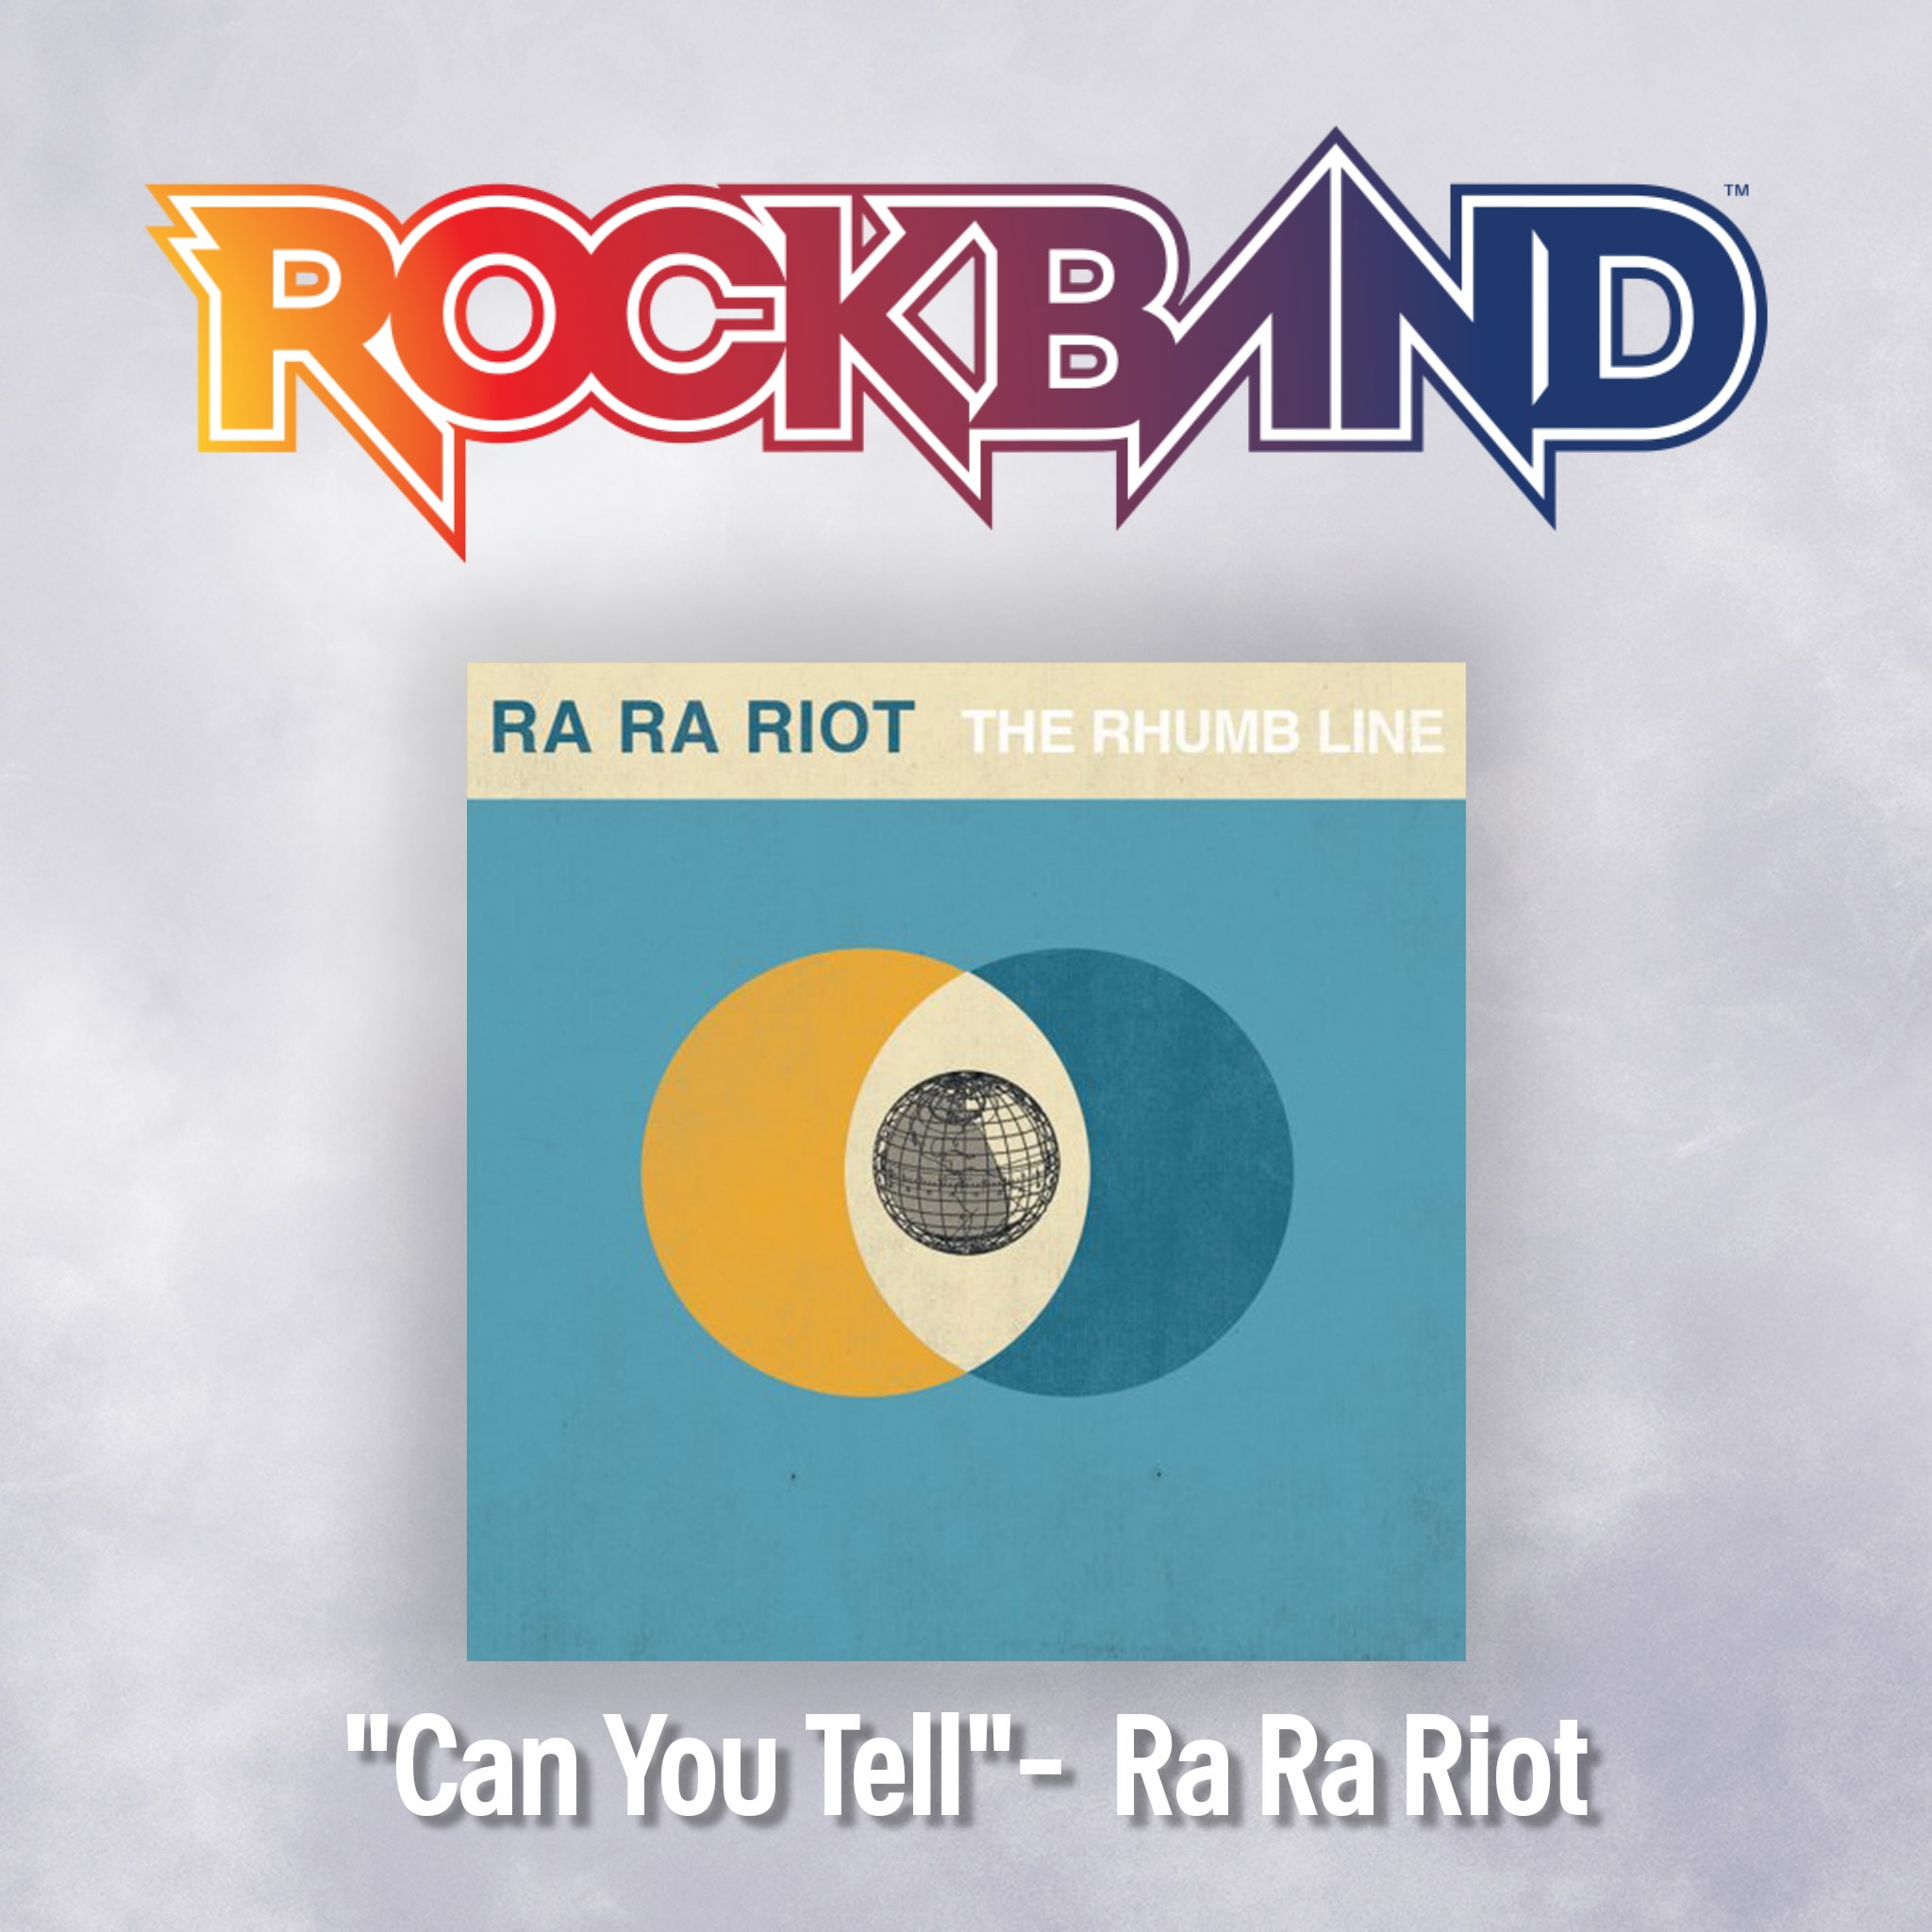 'Can You Tell'-  Ra Ra Riot